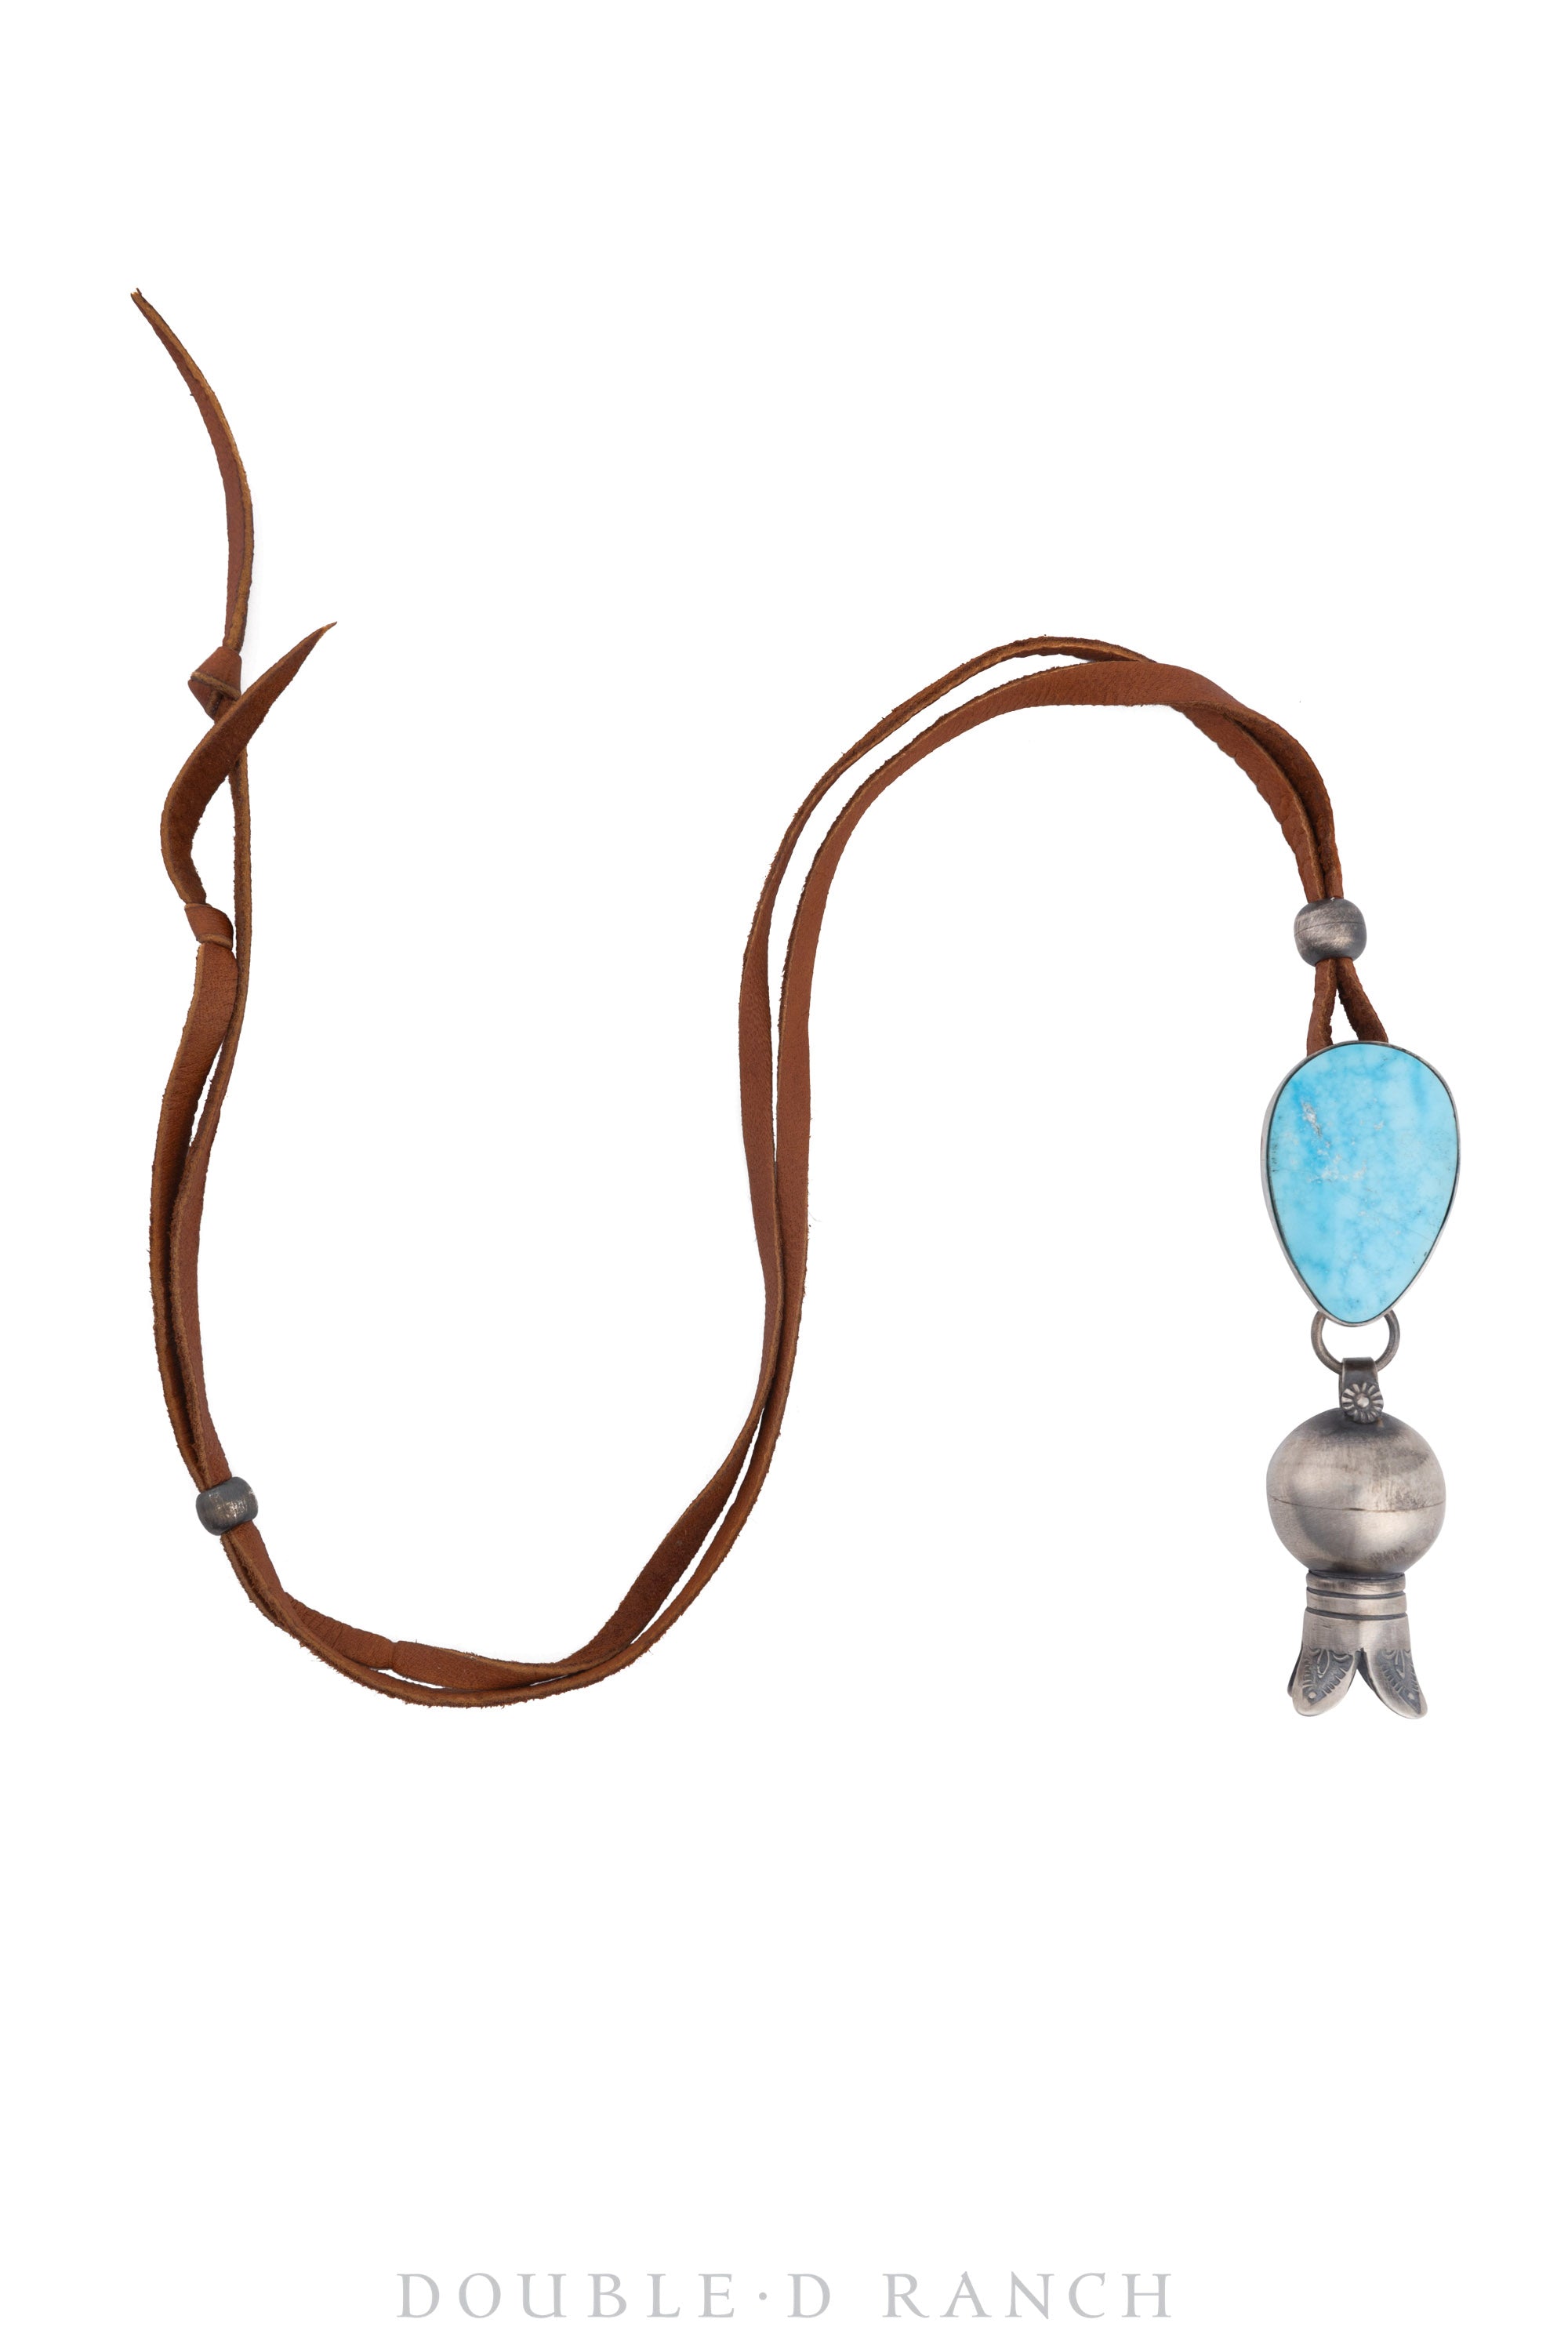 Necklace, Leather Thong, Turquoise, Squash Blossom, Hallmark, Contemporary, 3093